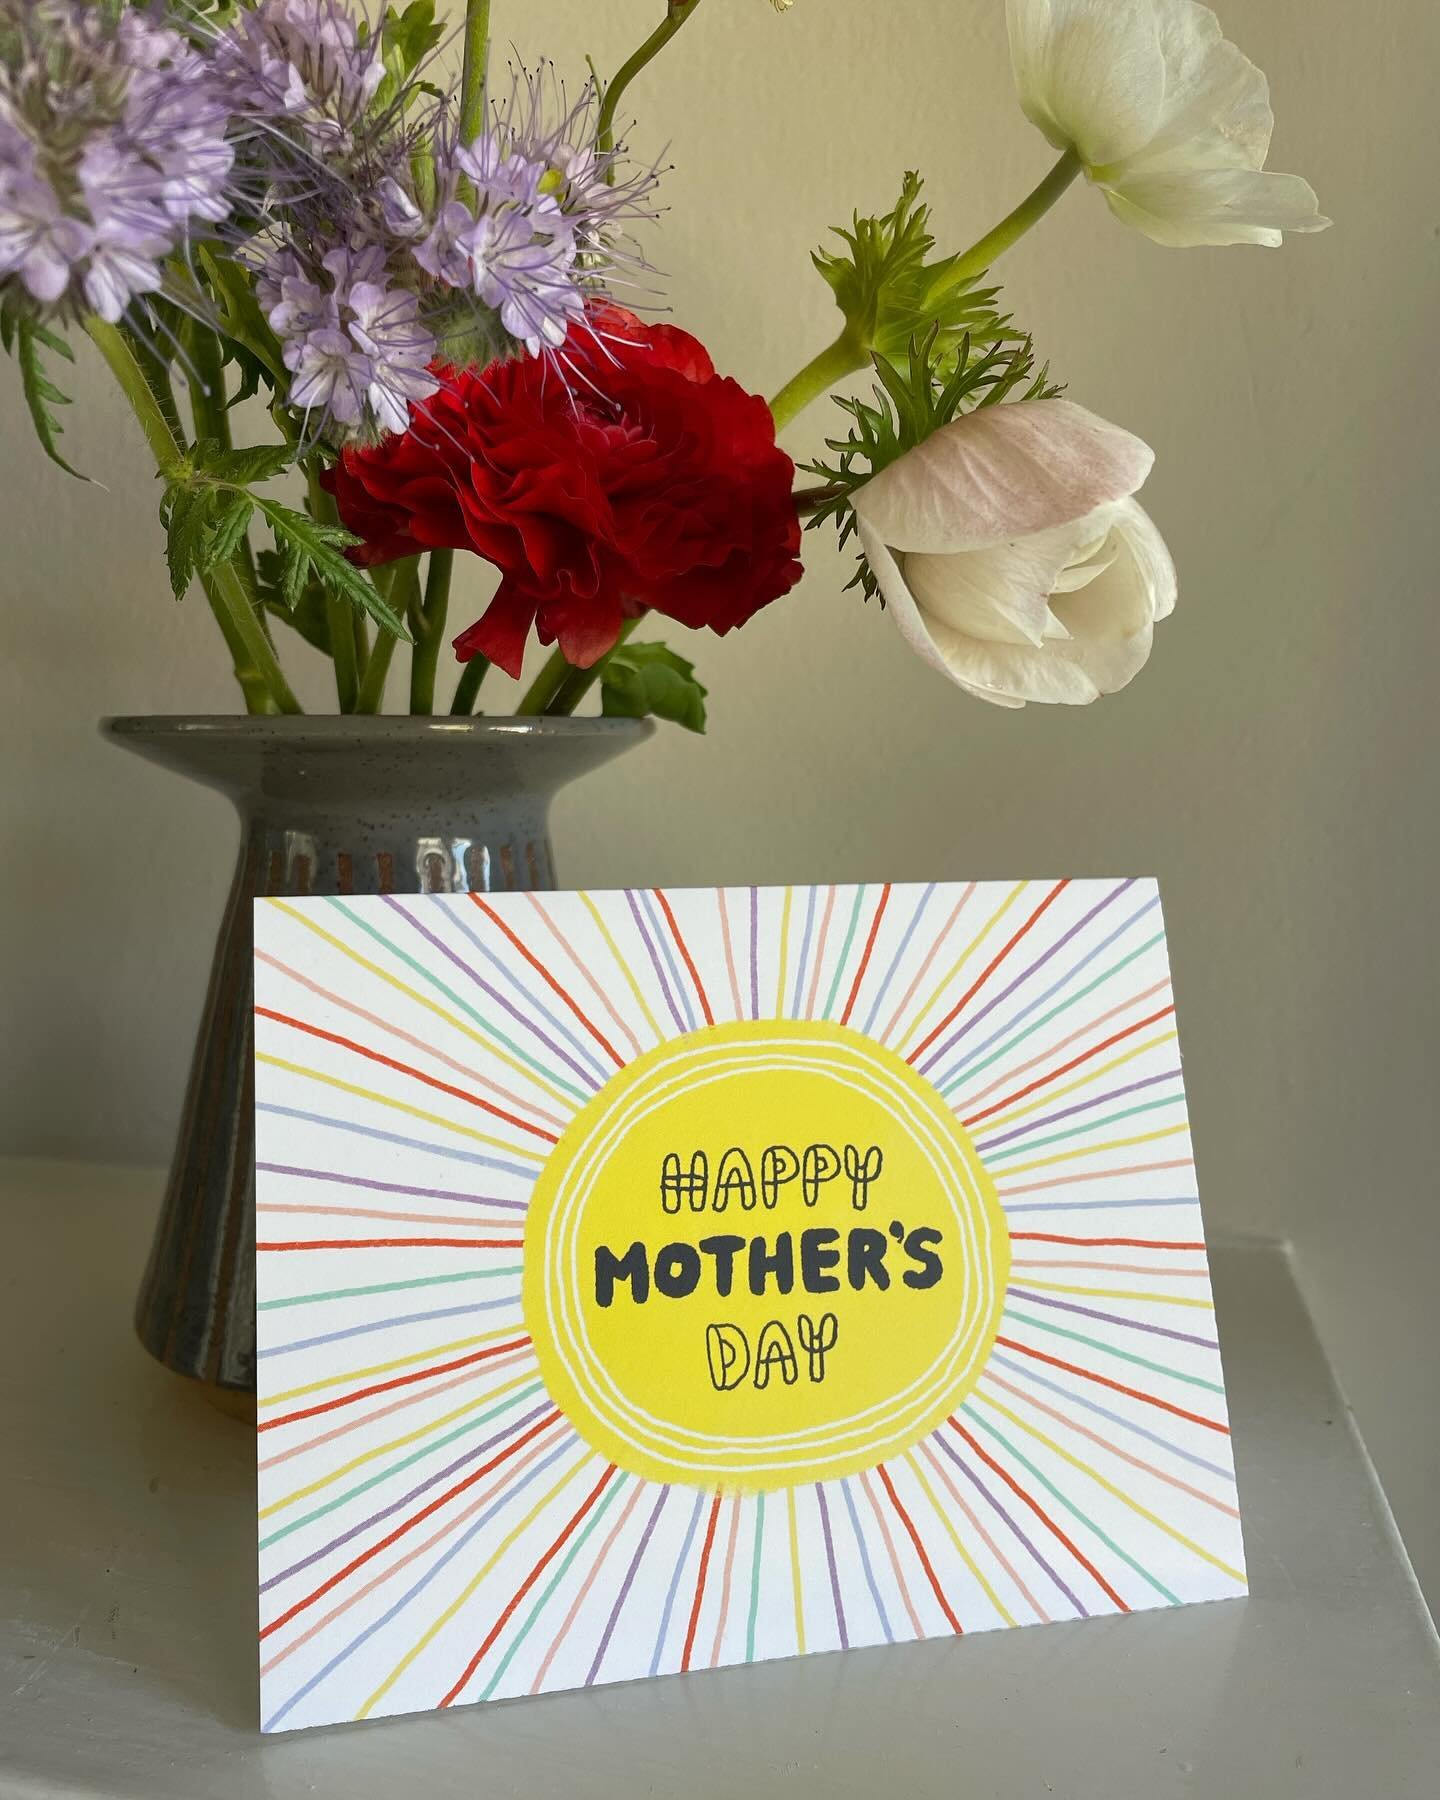 &ldquo;Momma said&hellip;&rdquo; don&rsquo;t forget to order your Mother&rsquo;s Day flowers! ✨hint hint ✨

Fun fact: in a previous career I used to manage a specialty store that sold stationery! I miss having an endless supply of greeting cards to c